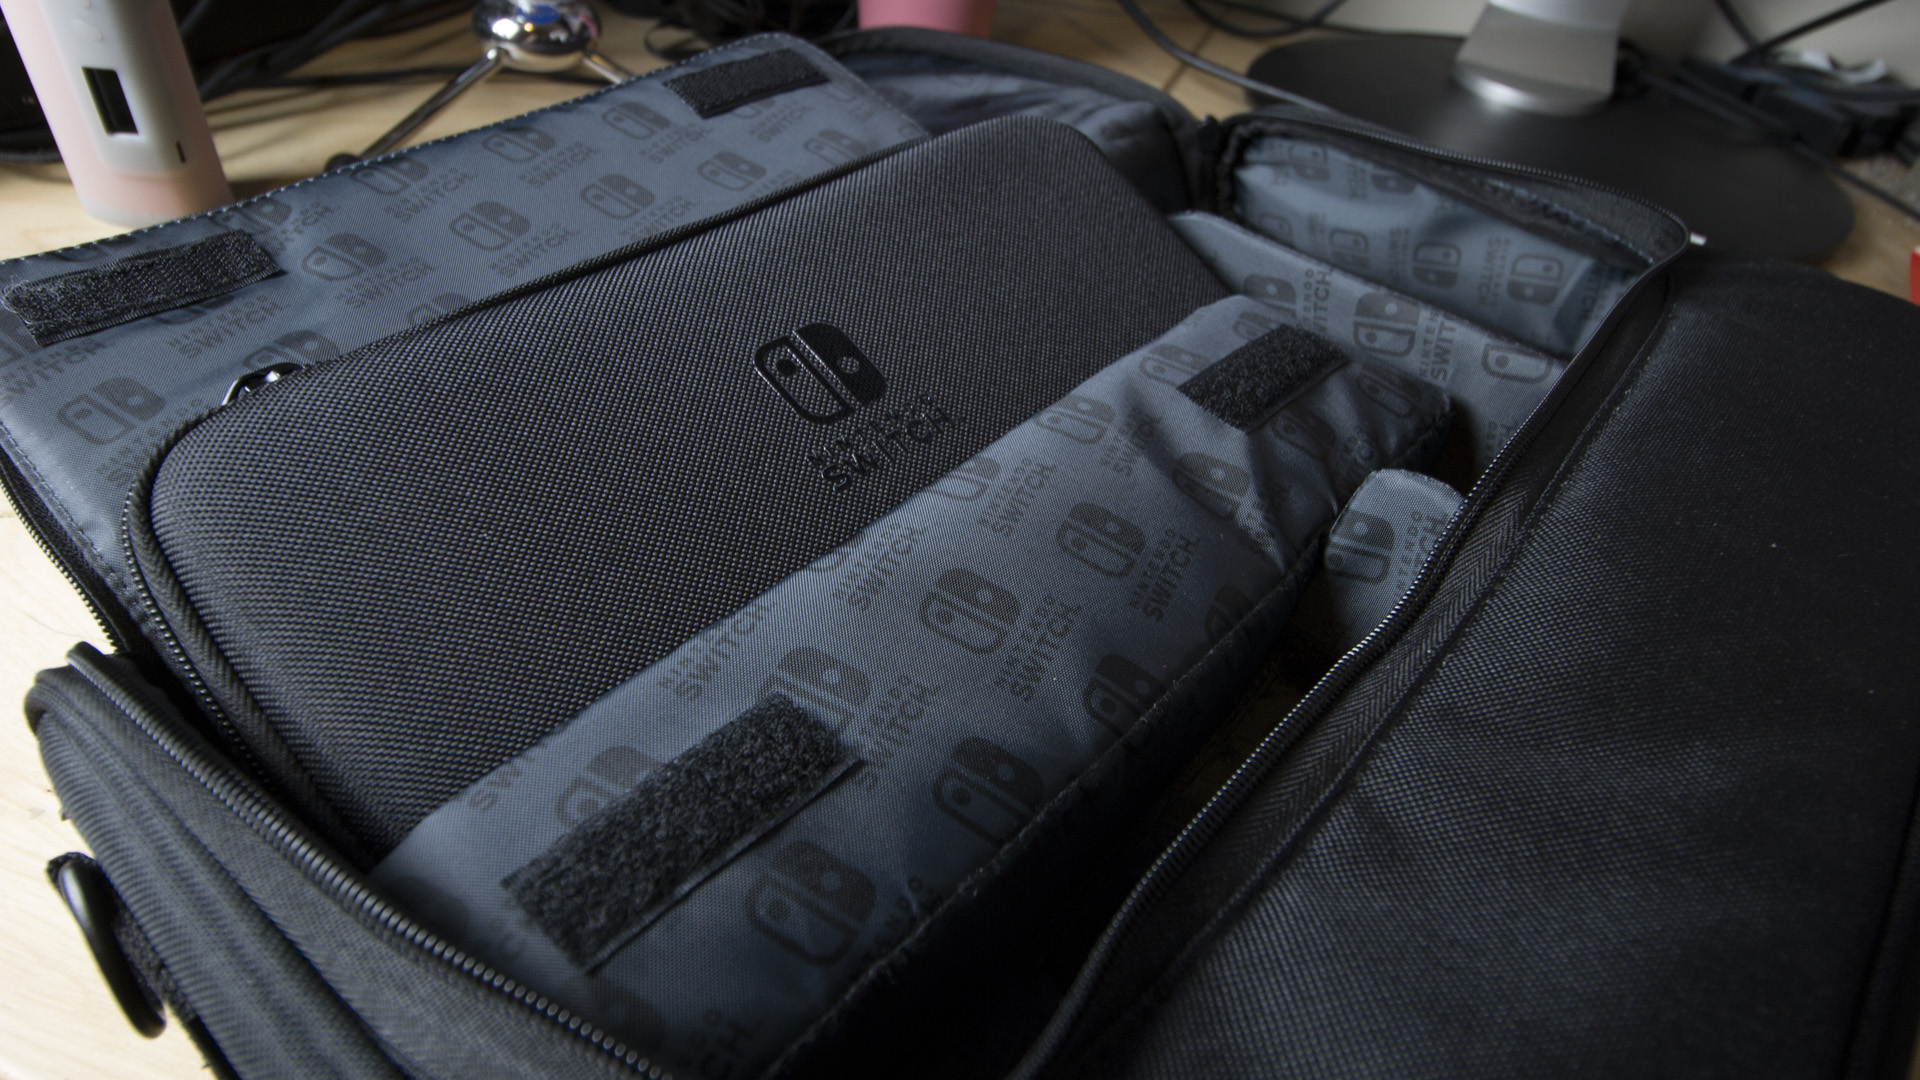 What Gear Are You Using With Your New Nintendo Switch?